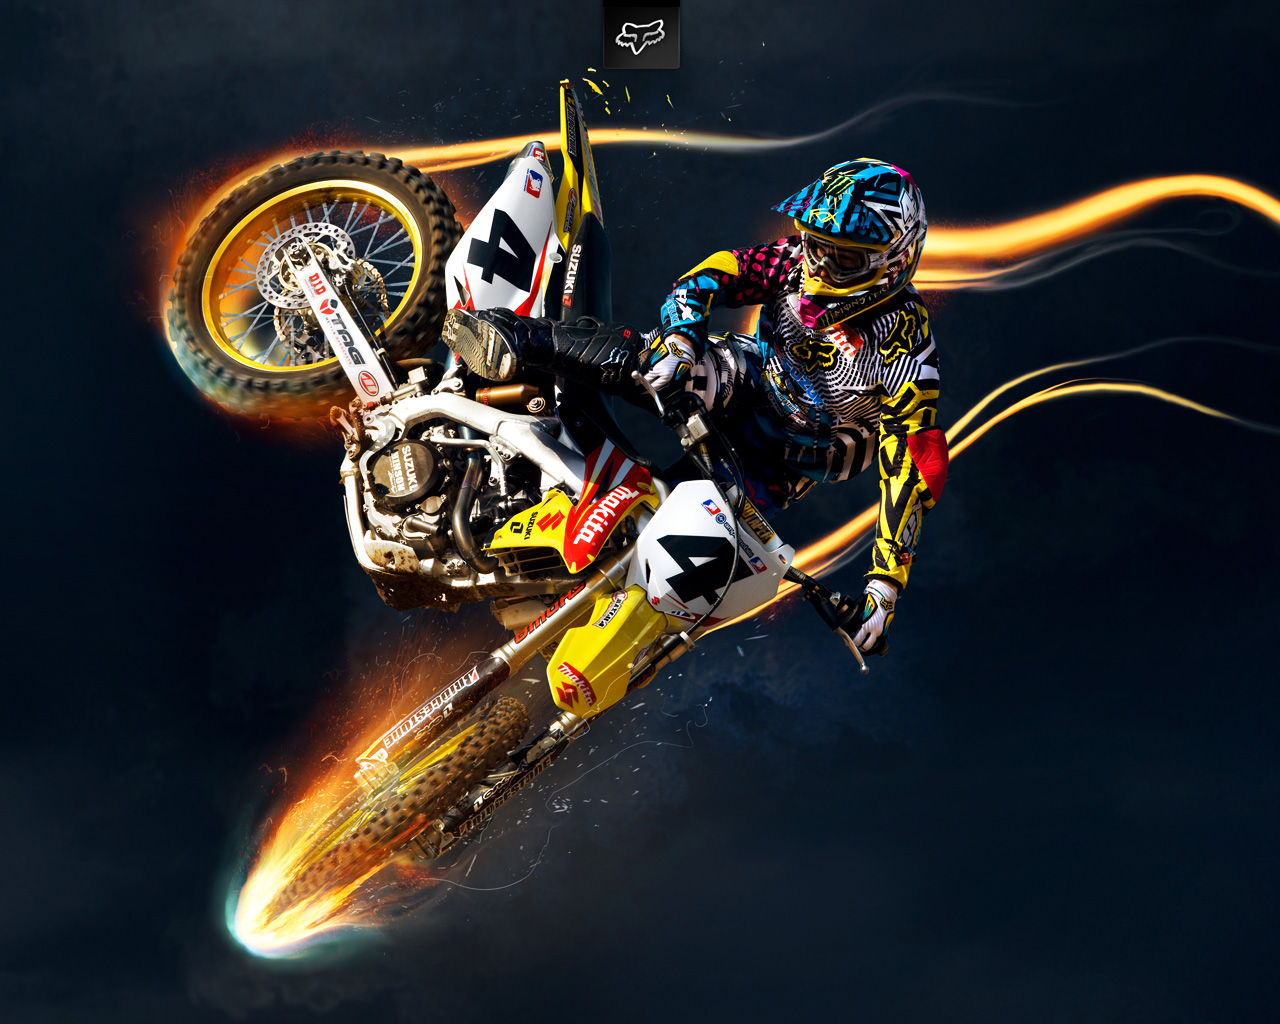 Sunset Bike Racing - Motocross for android download